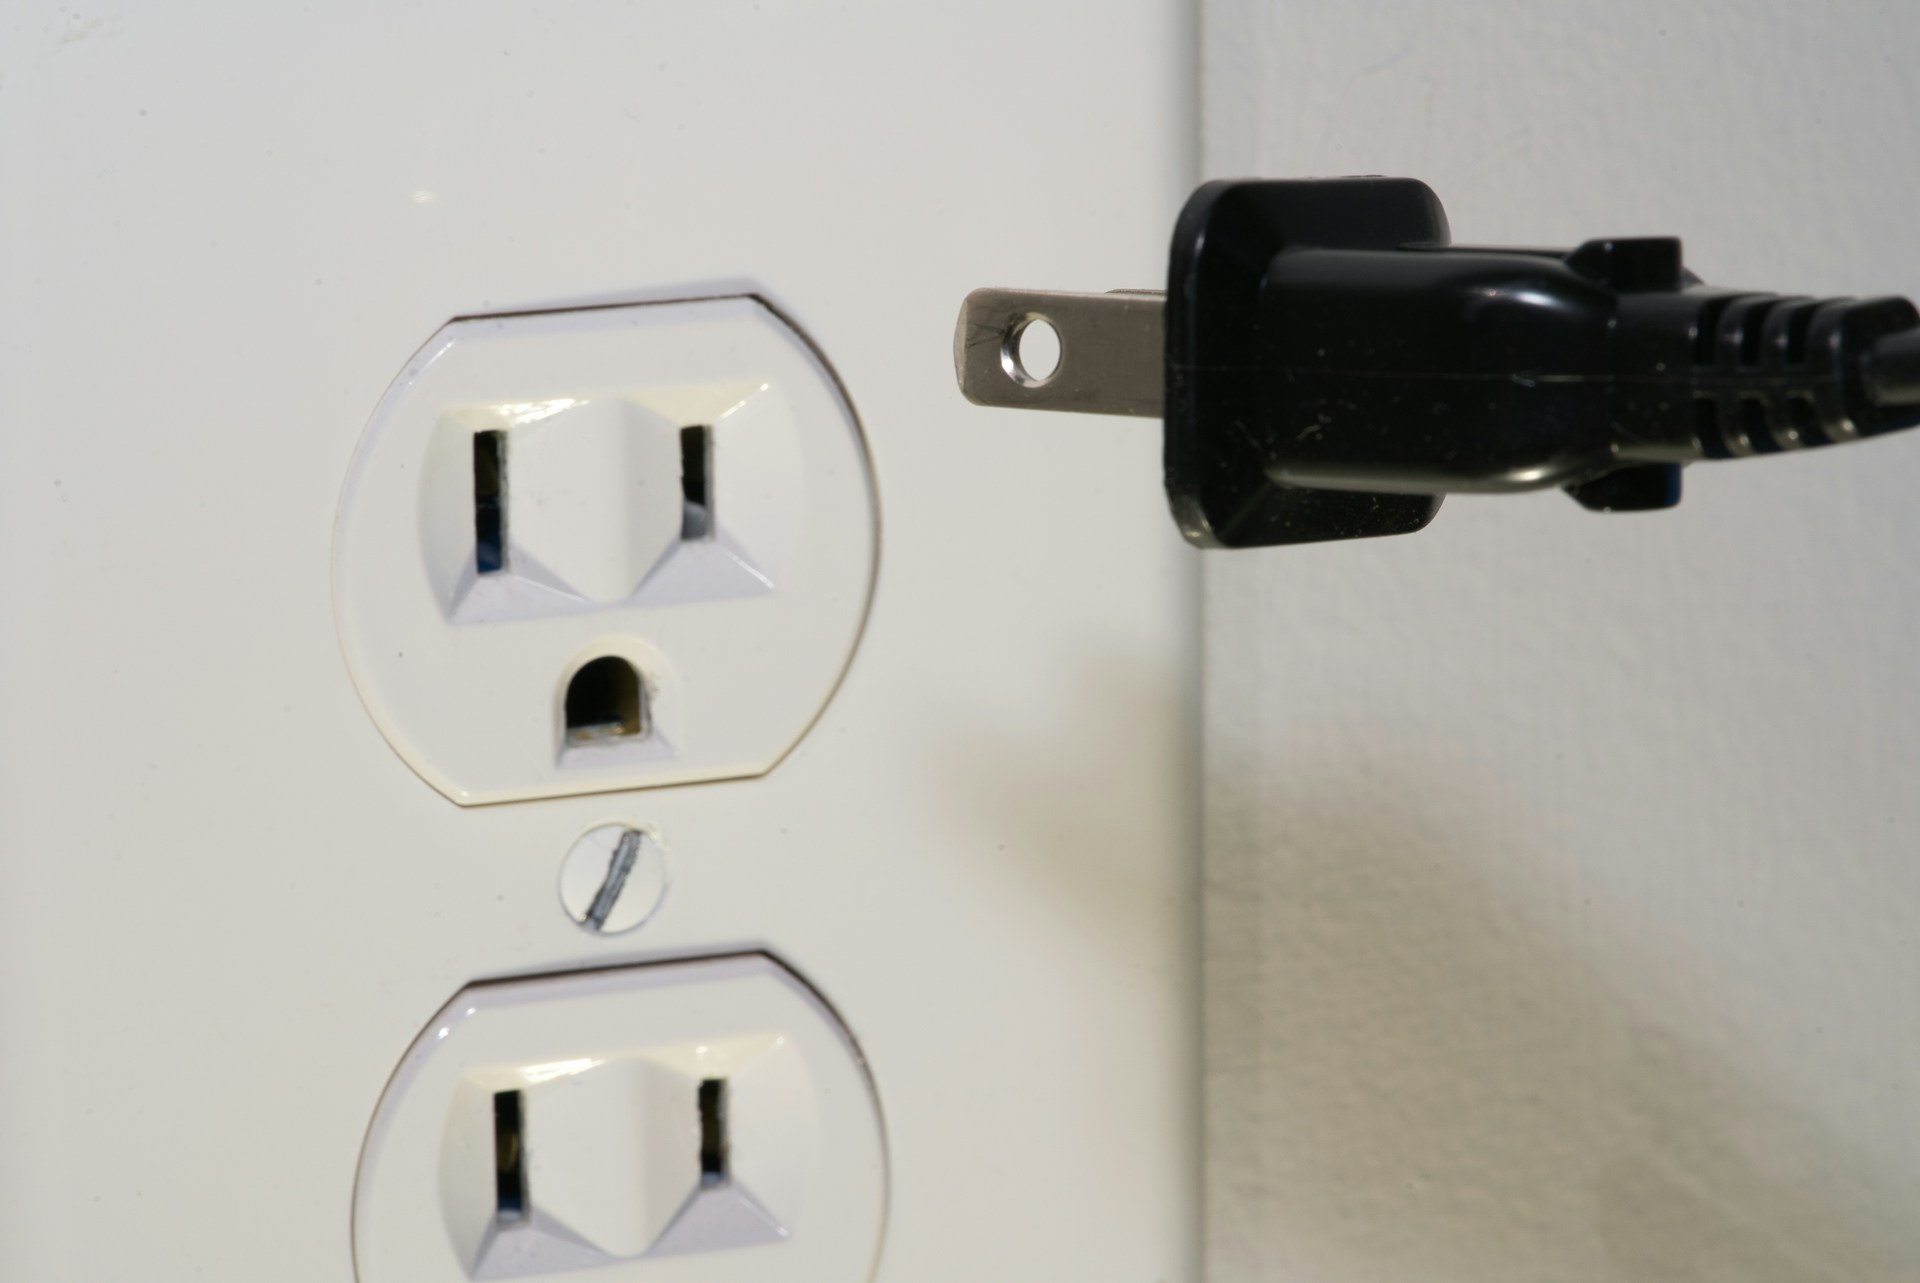 Someone about to plug an appliance in and test an electrical outlet after de-winterizing a home